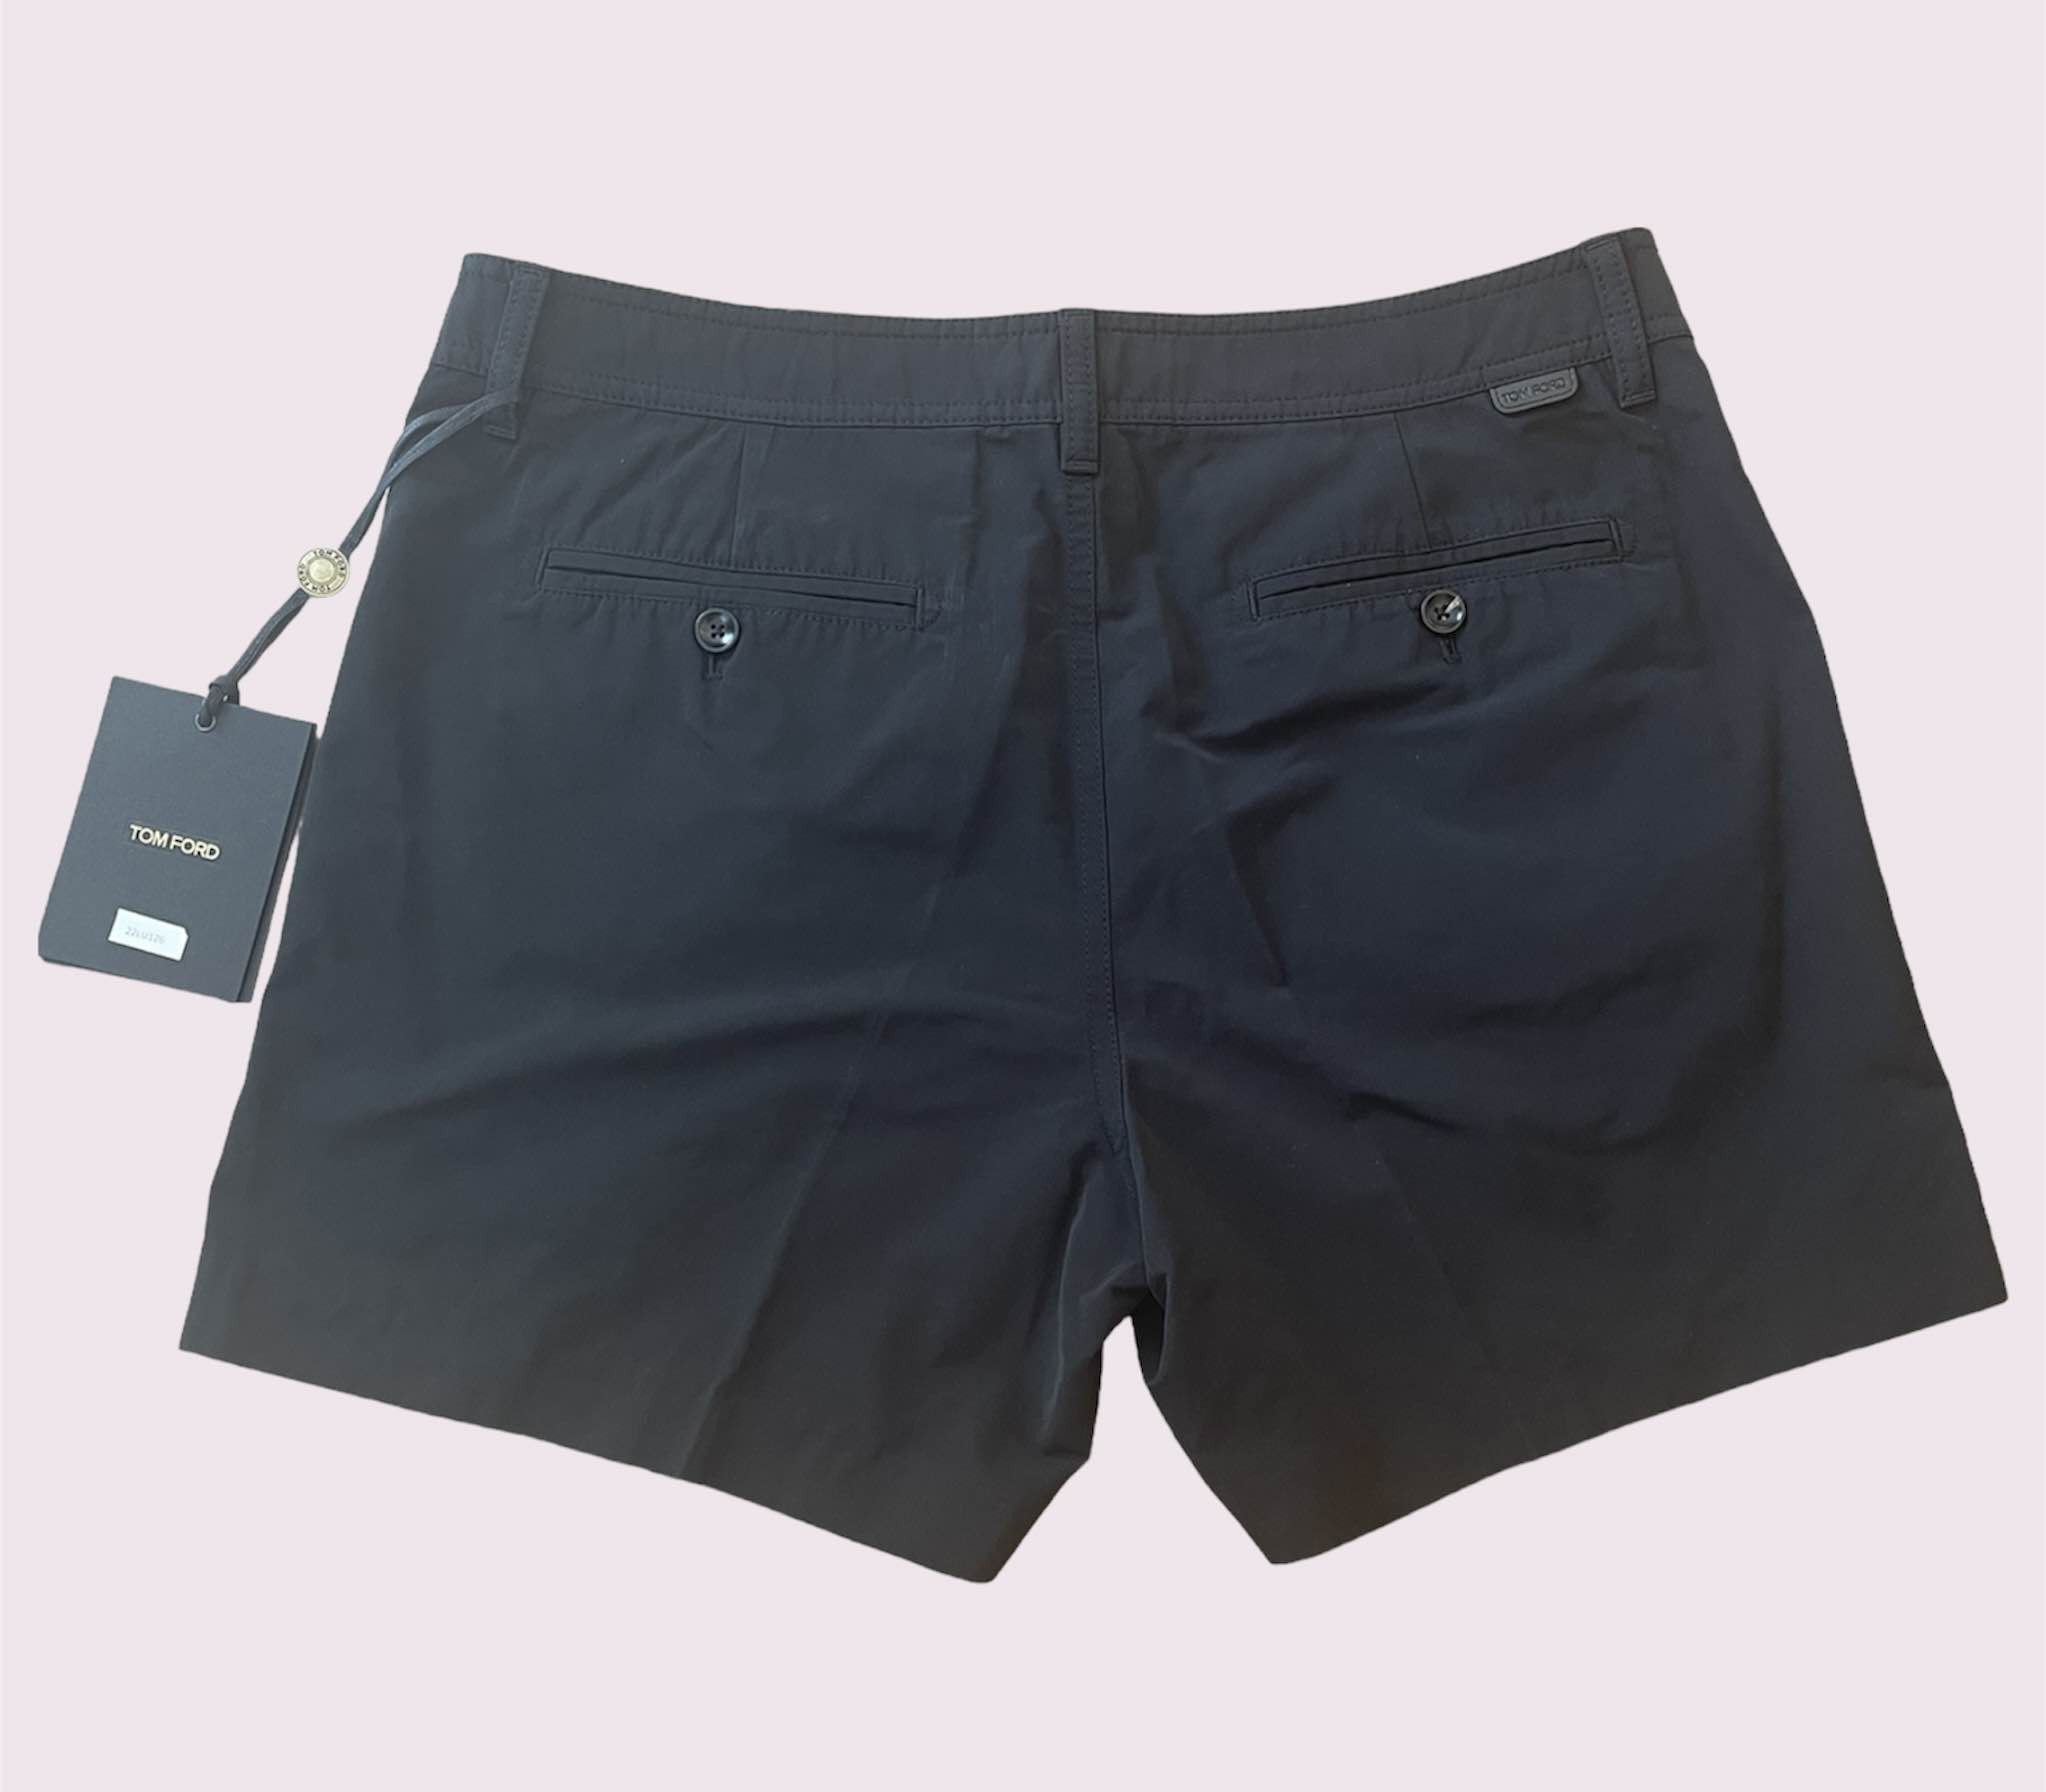 Tom Ford Shorts (New With Tags) - 2